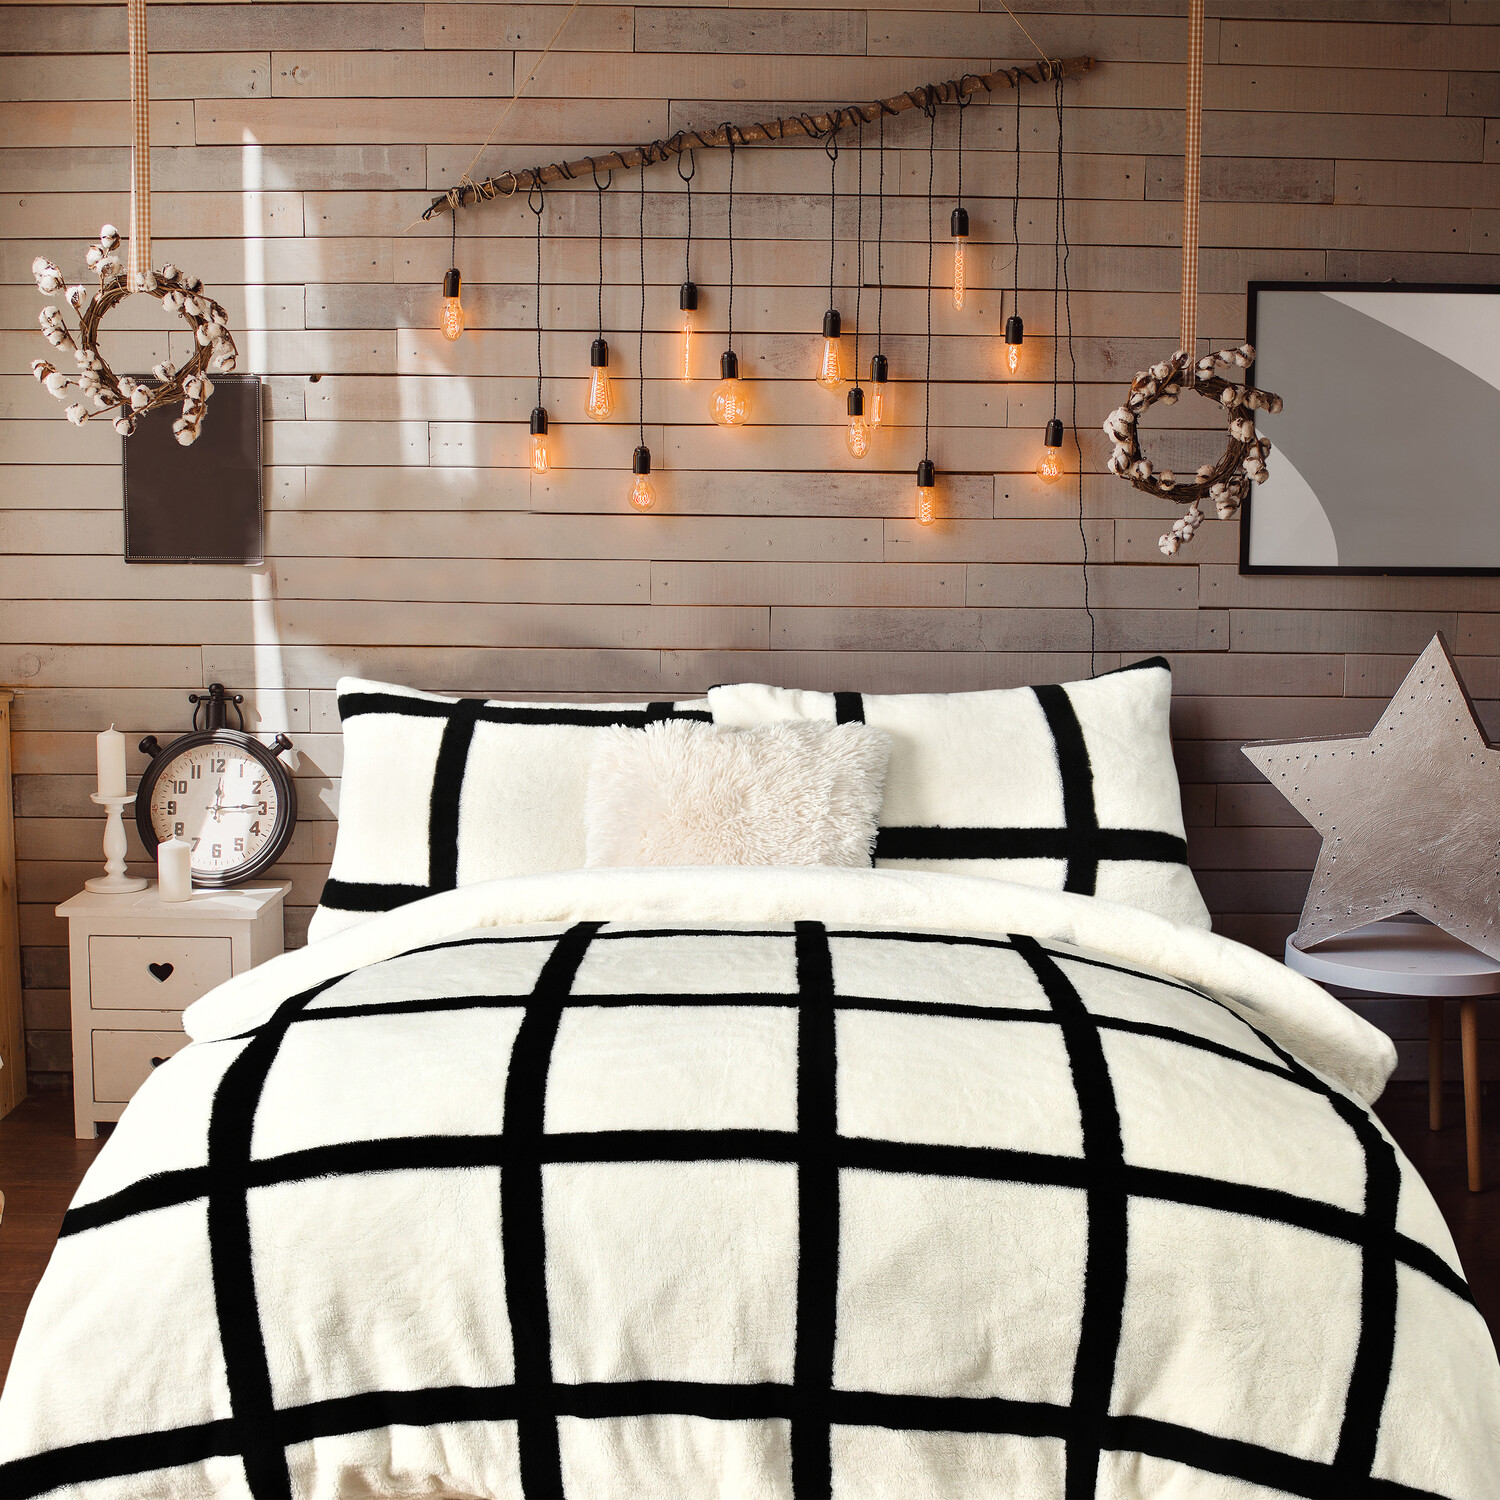 Large Grid Check Teddy Duvet Cover and Pillowcase Set - Natural / Double Image 1